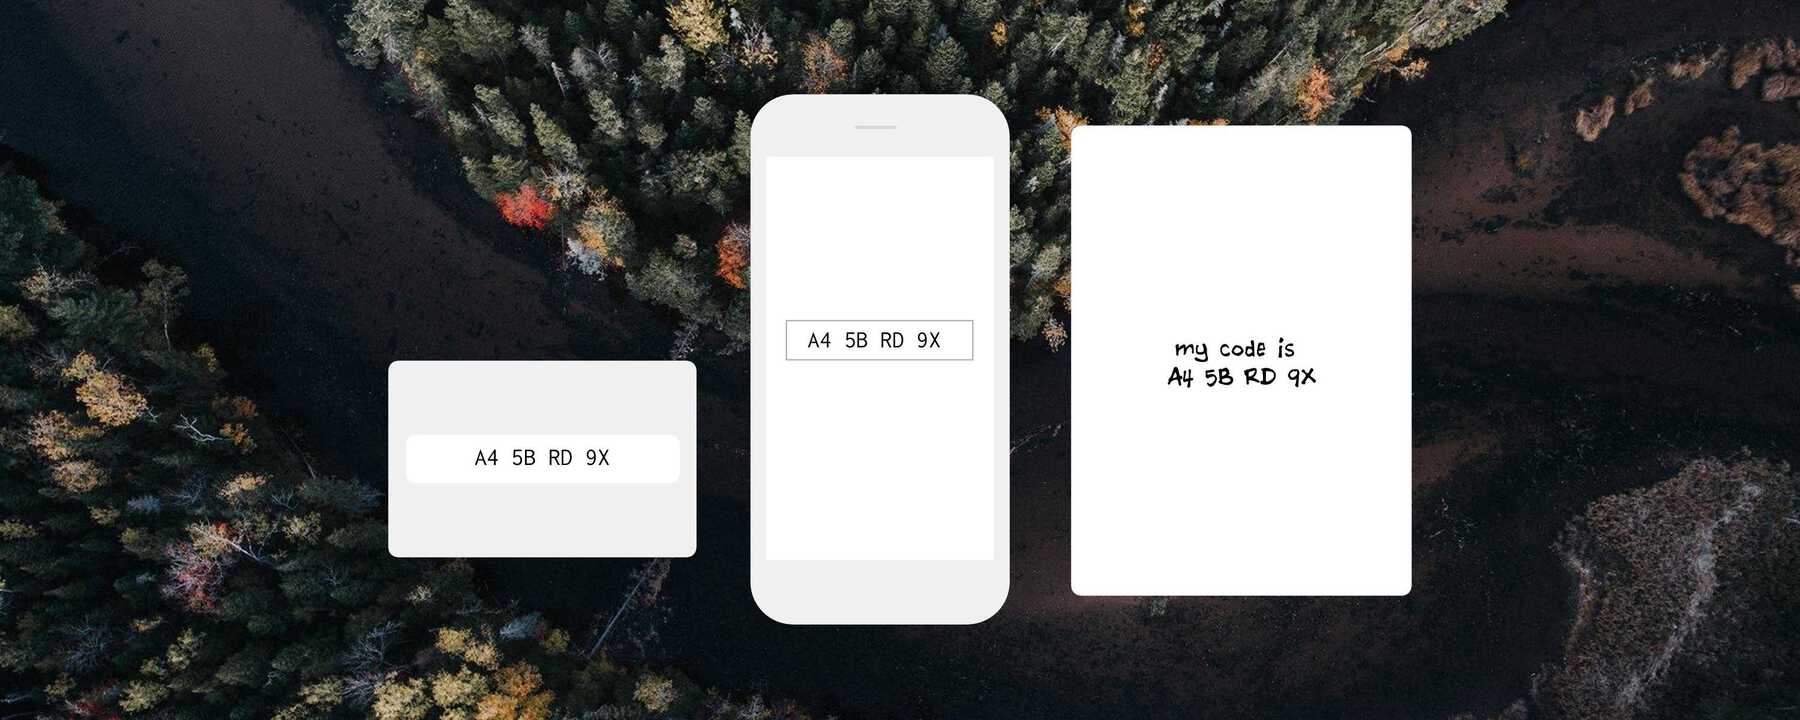 Forest background with phone outline and codes